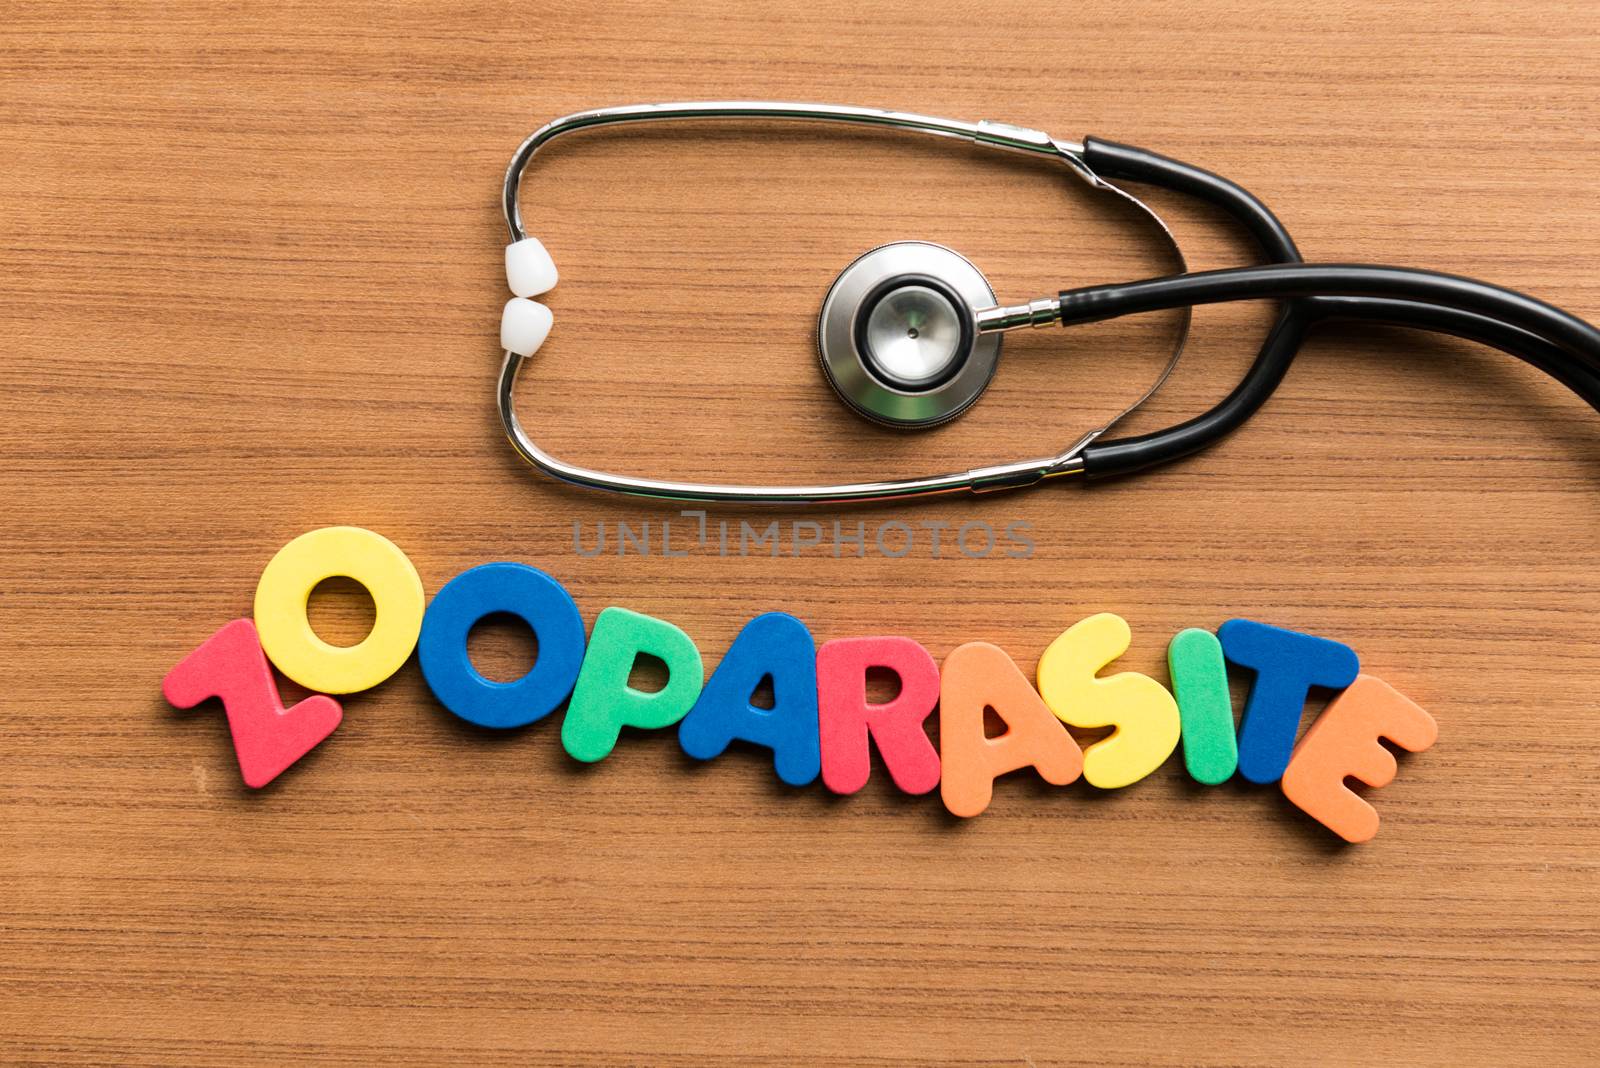 zooparasite colorful word with stethoscope by sohel.parvez@hotmail.com